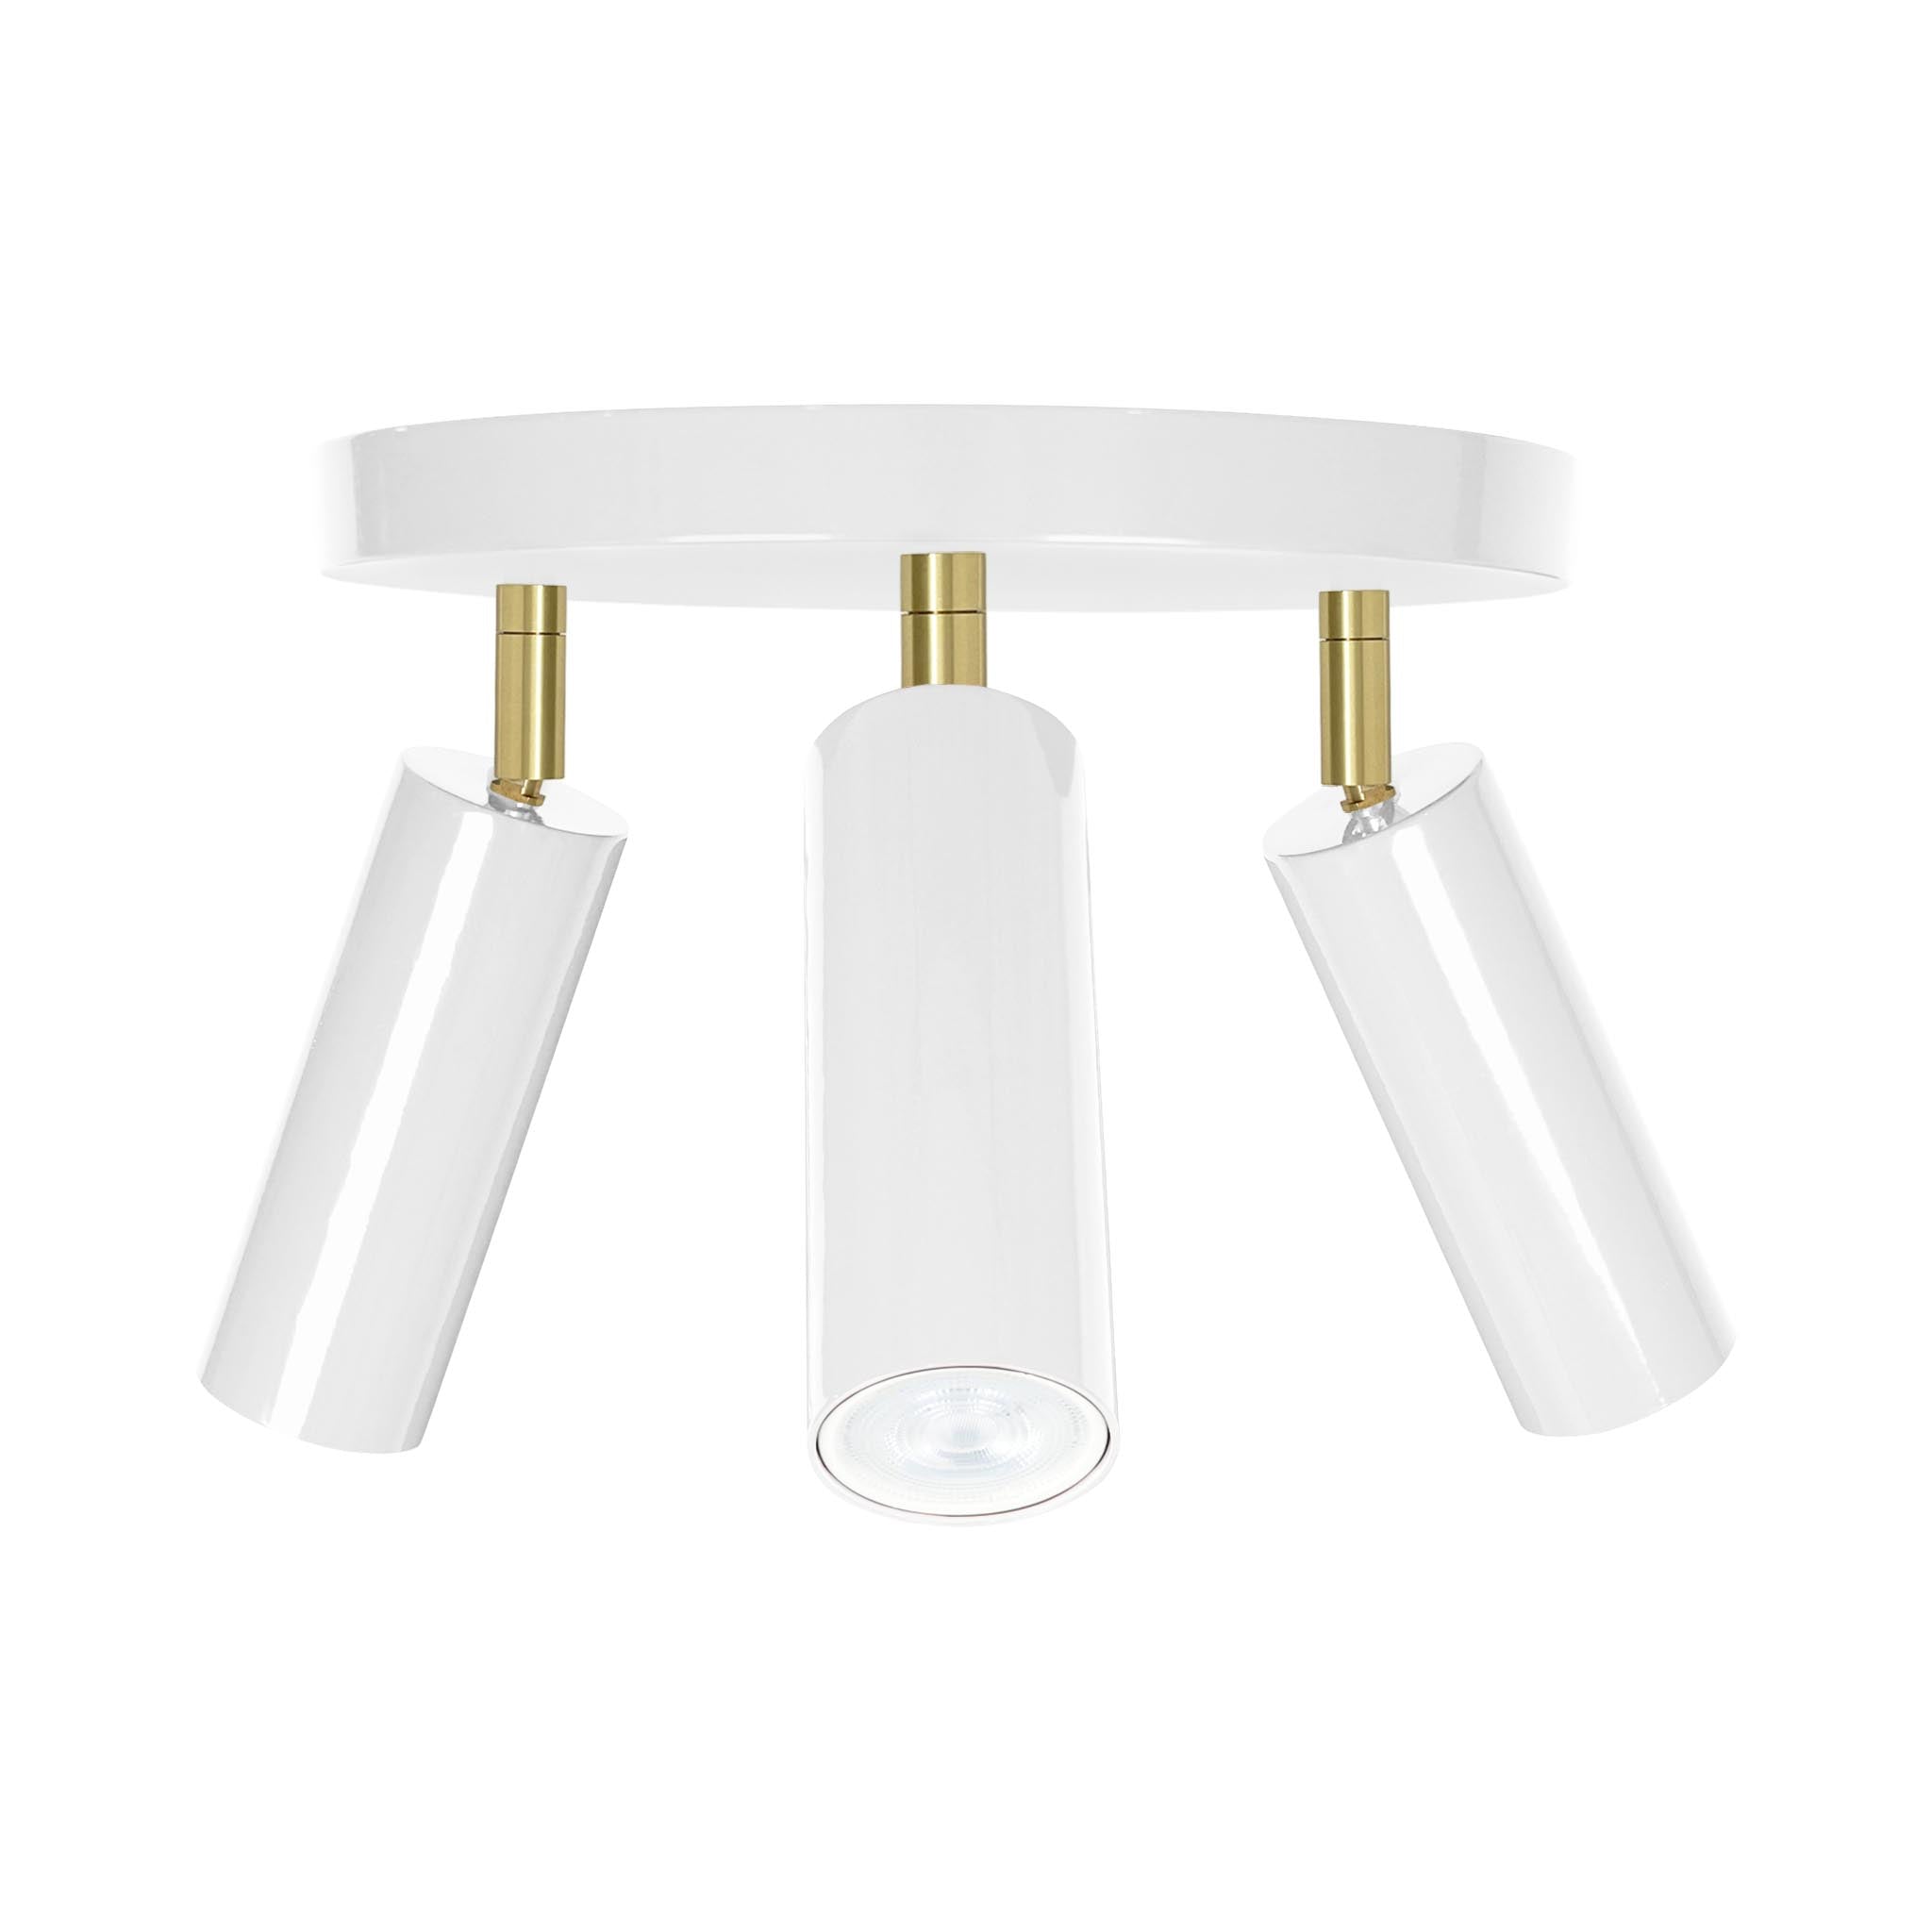 Brass and white color Pose flush mount Dutton Brown lighting